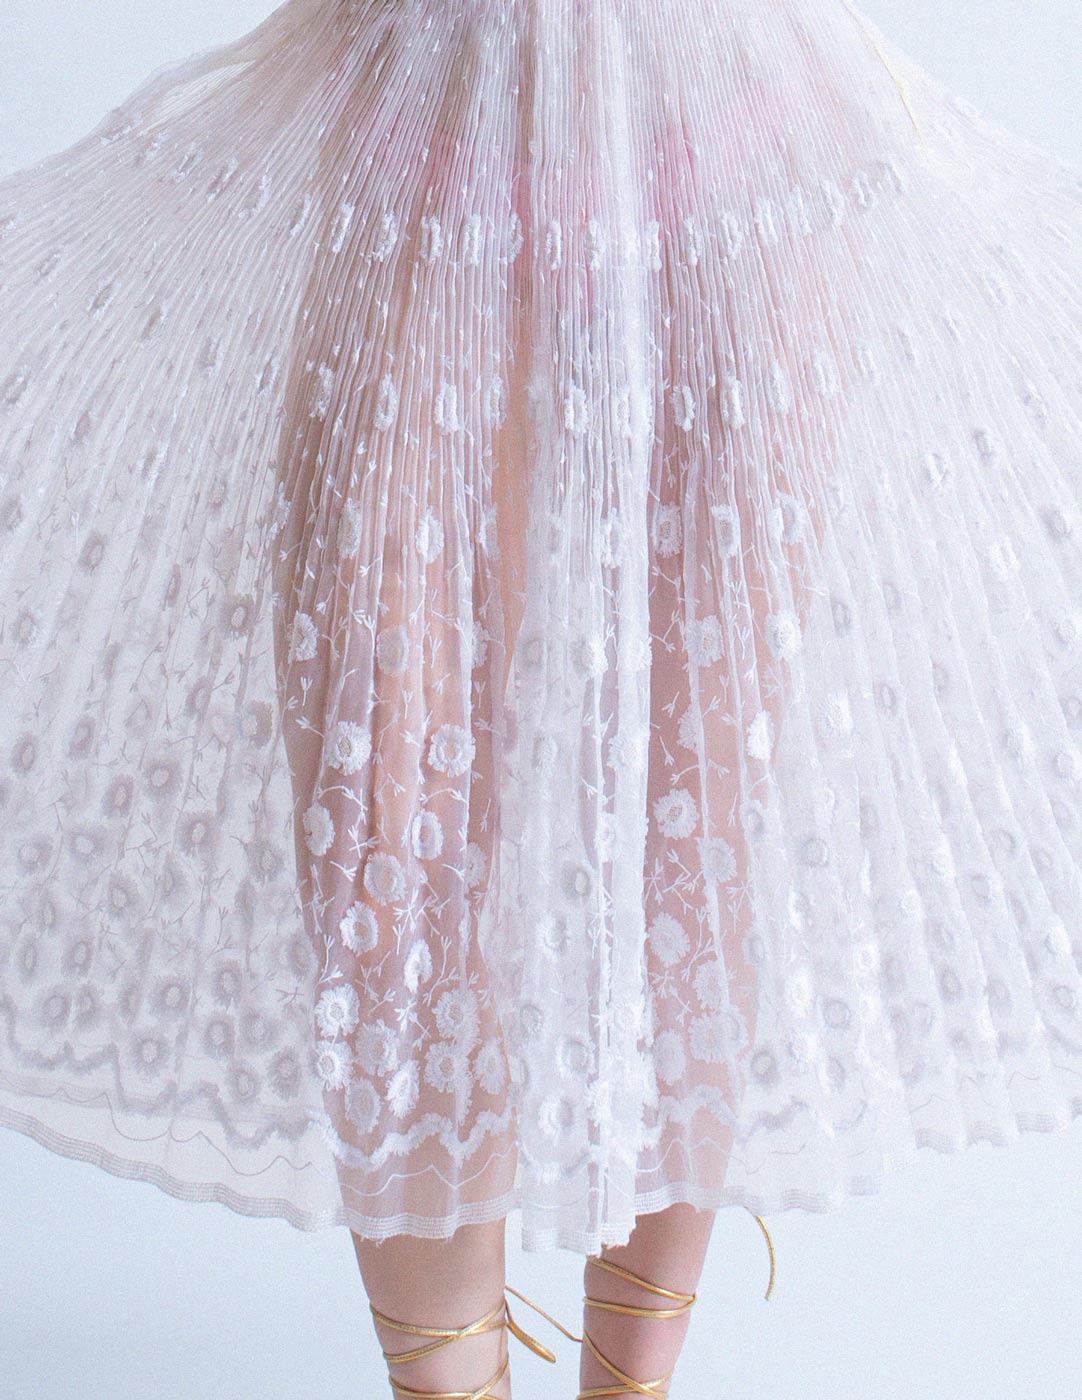 Comme des Garçons embroidered lace pleated skirt fabric detail